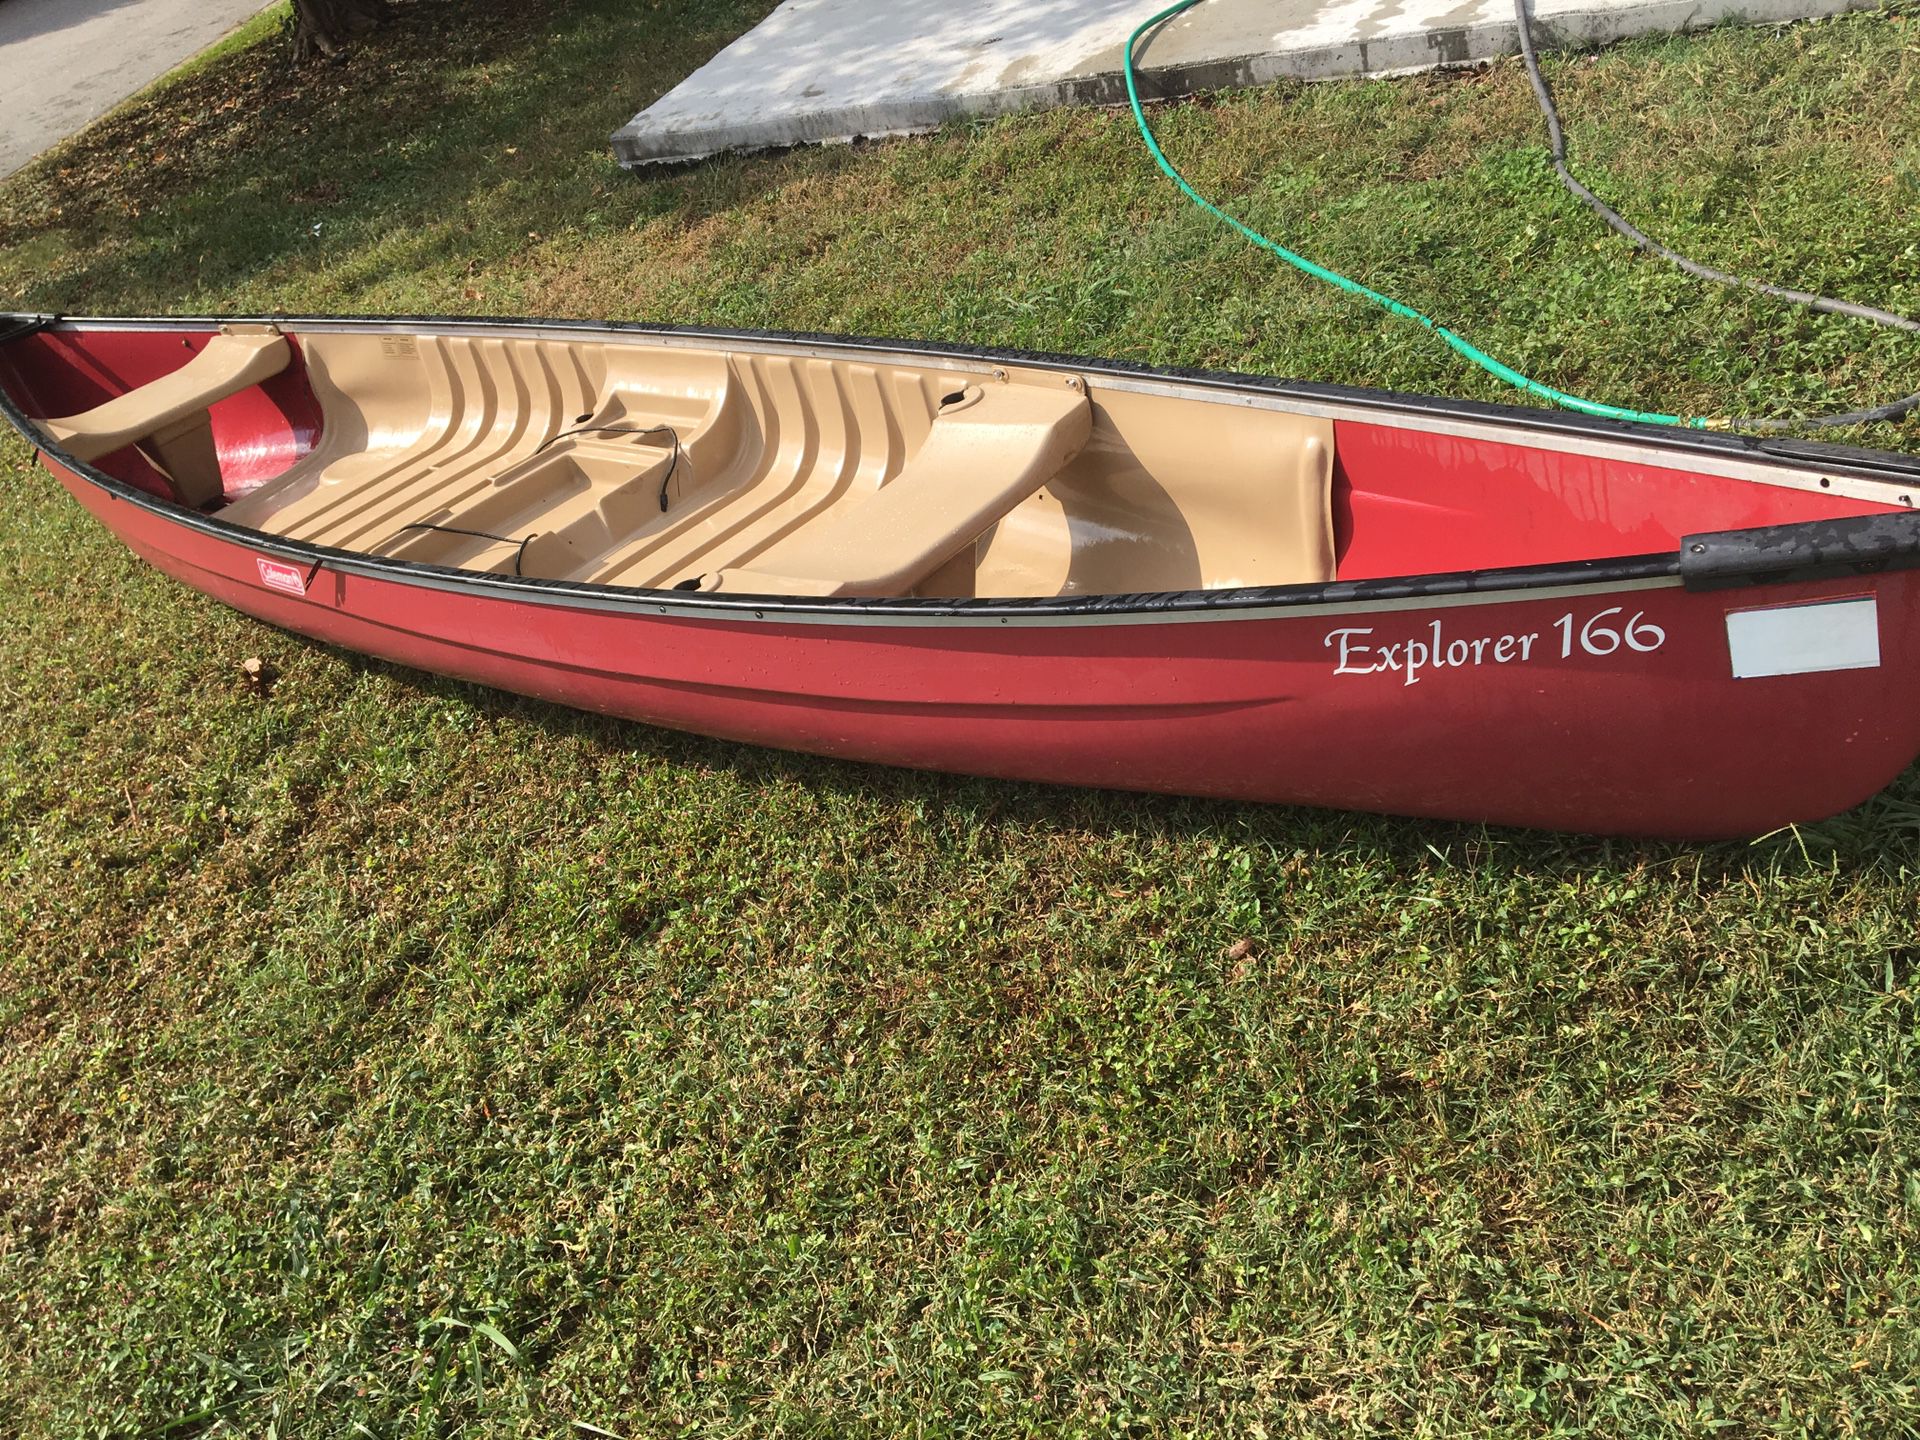 Canoe looking to trade or sale